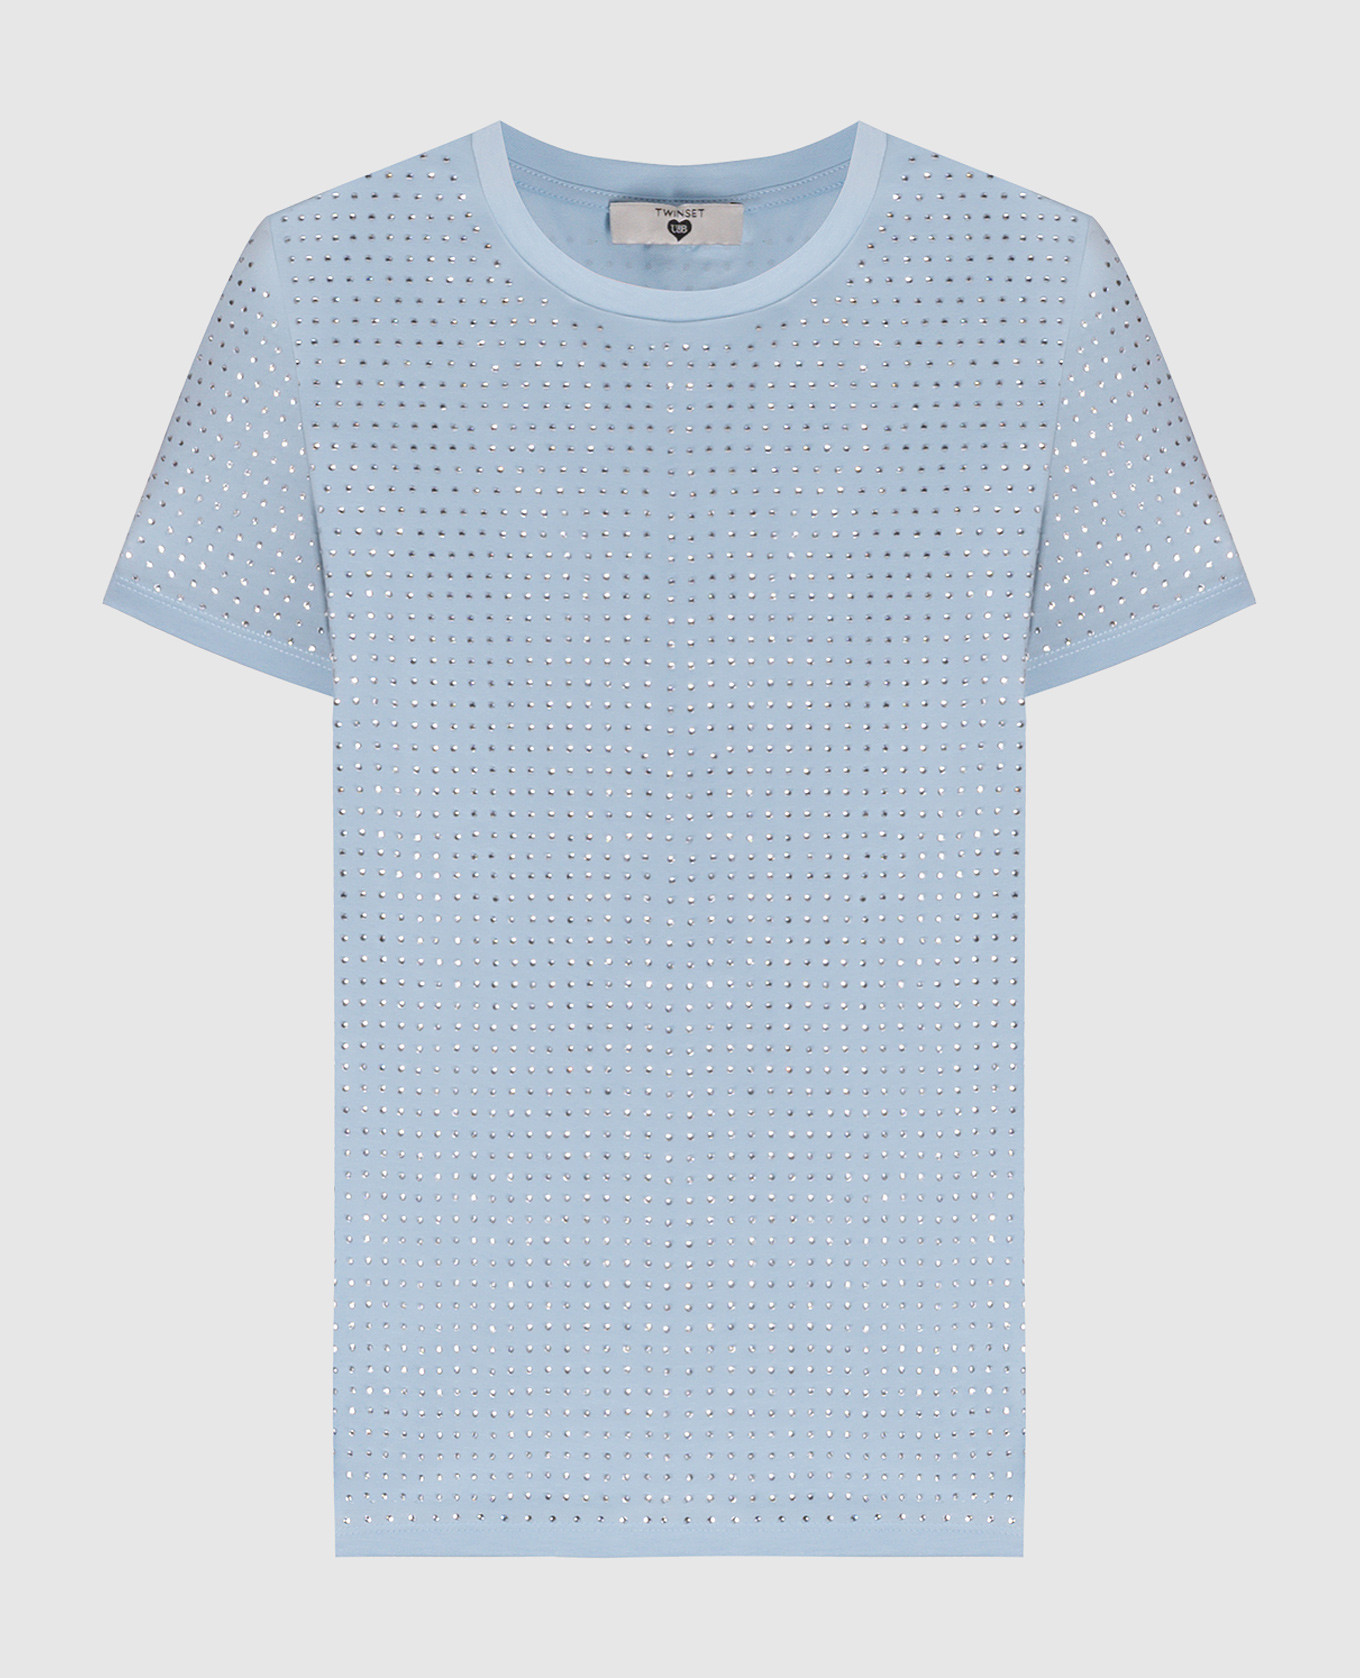 Blue t-shirt with crystals